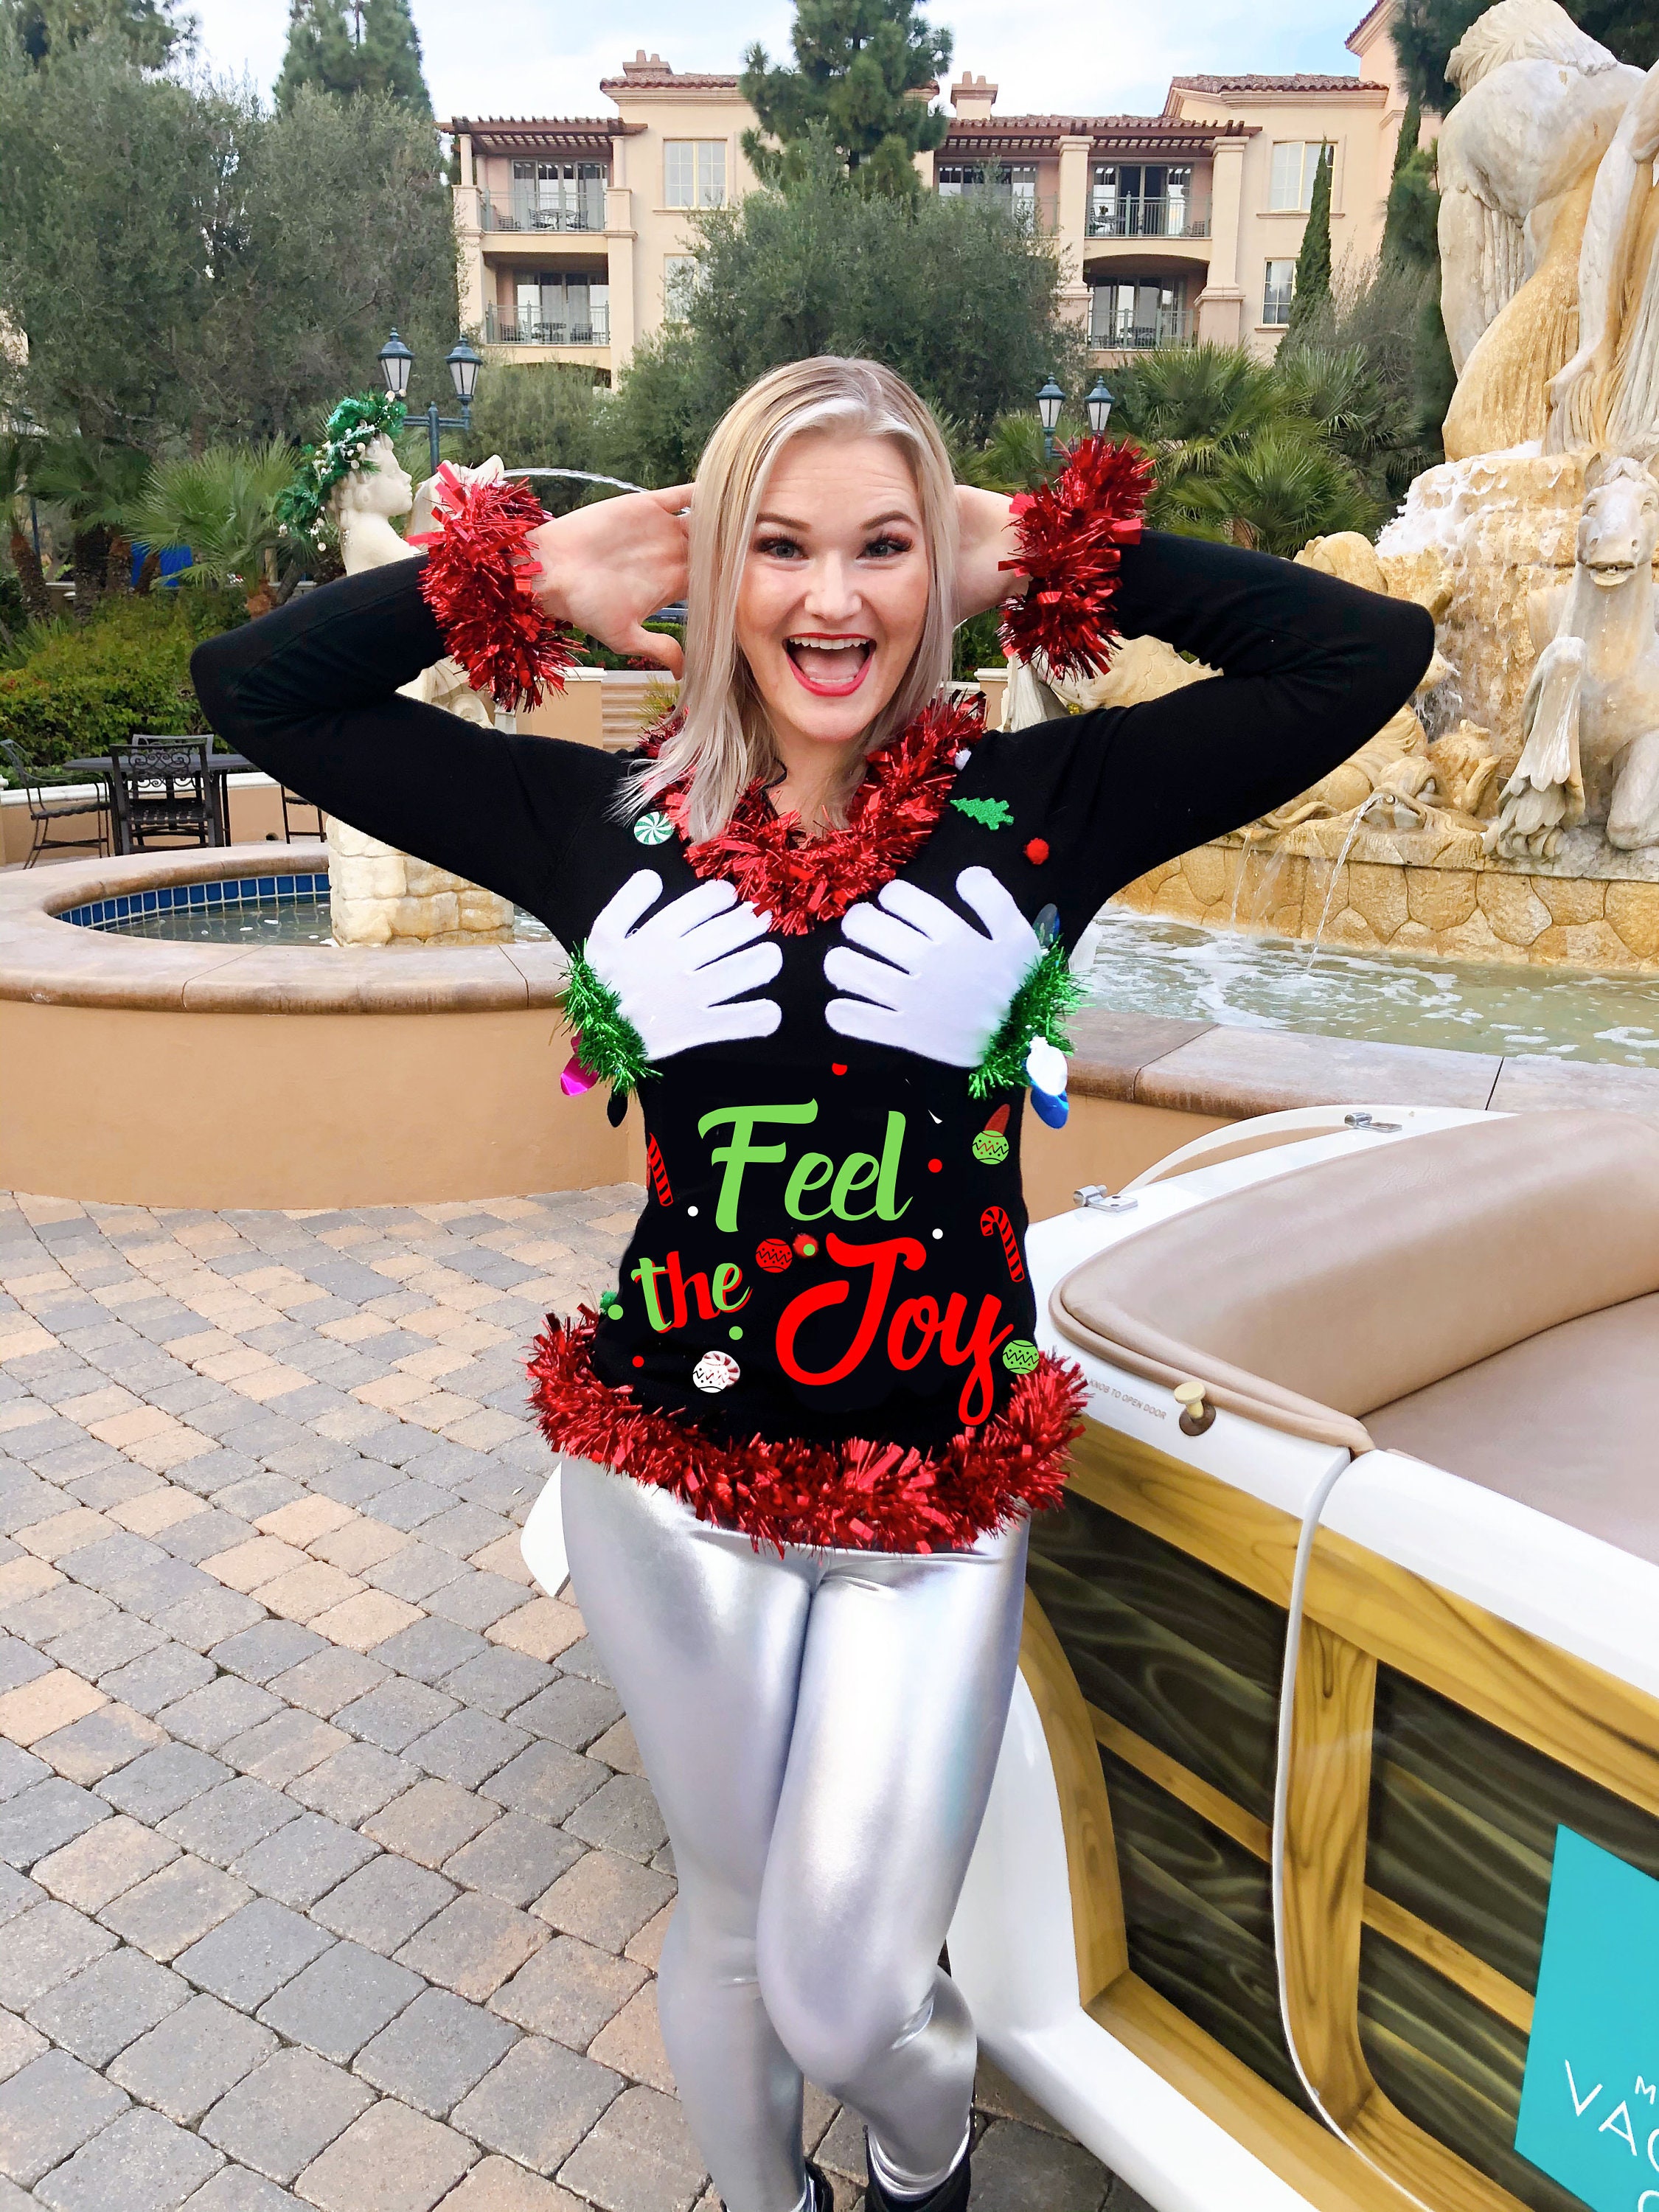 Too Lit Light Up Plus Size Ugly Christmas Sweater: Women's